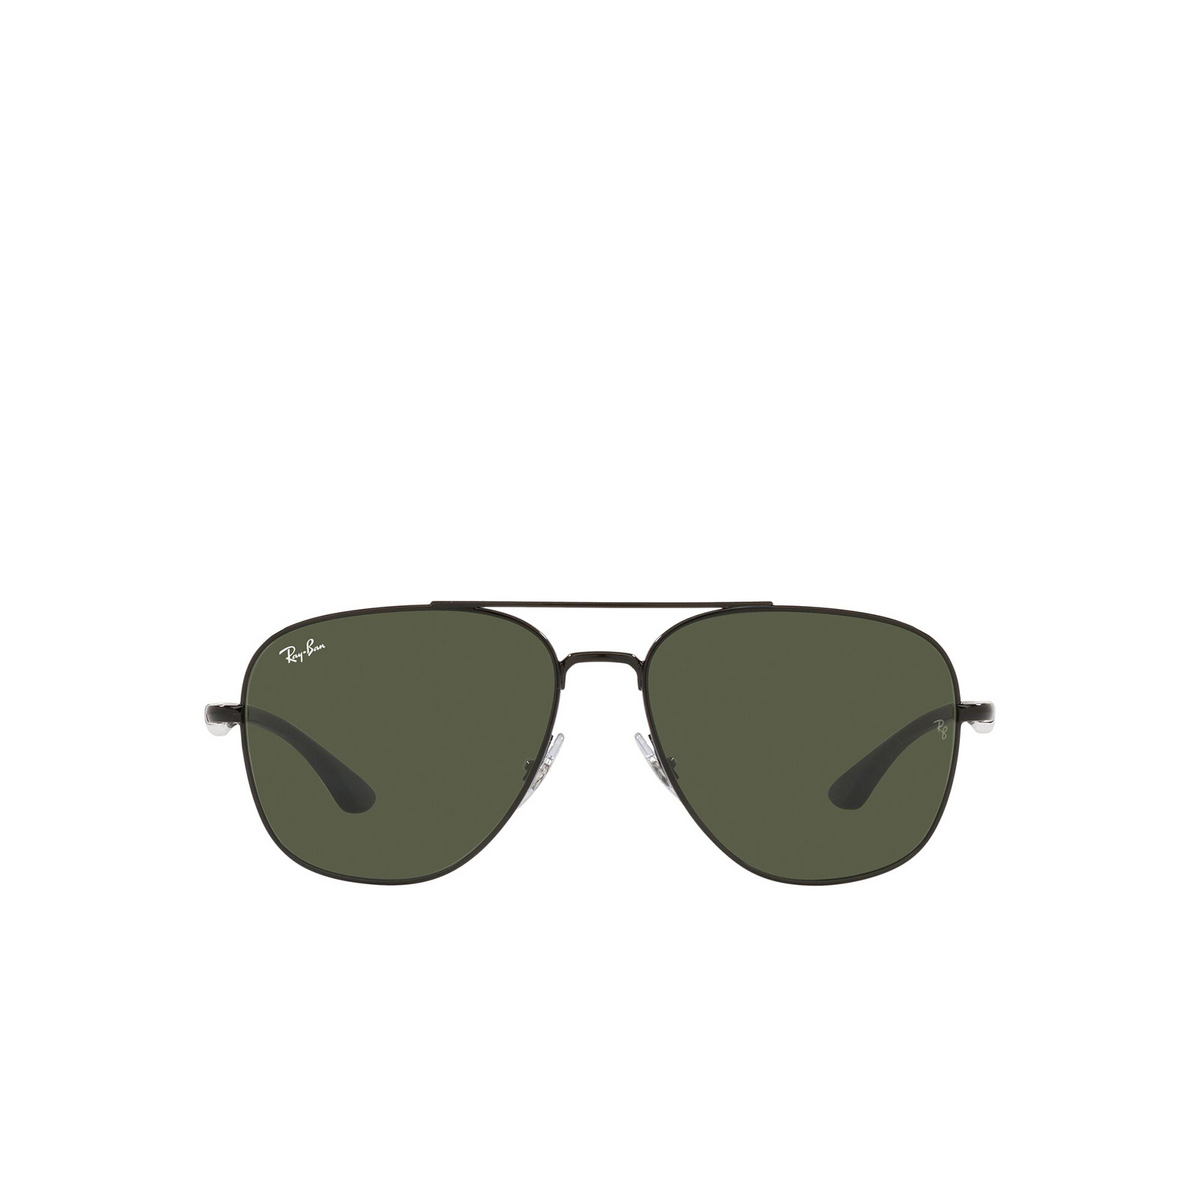 Ray-Ban® Square Sunglasses: RB3683 color Black 002/31 - front view.